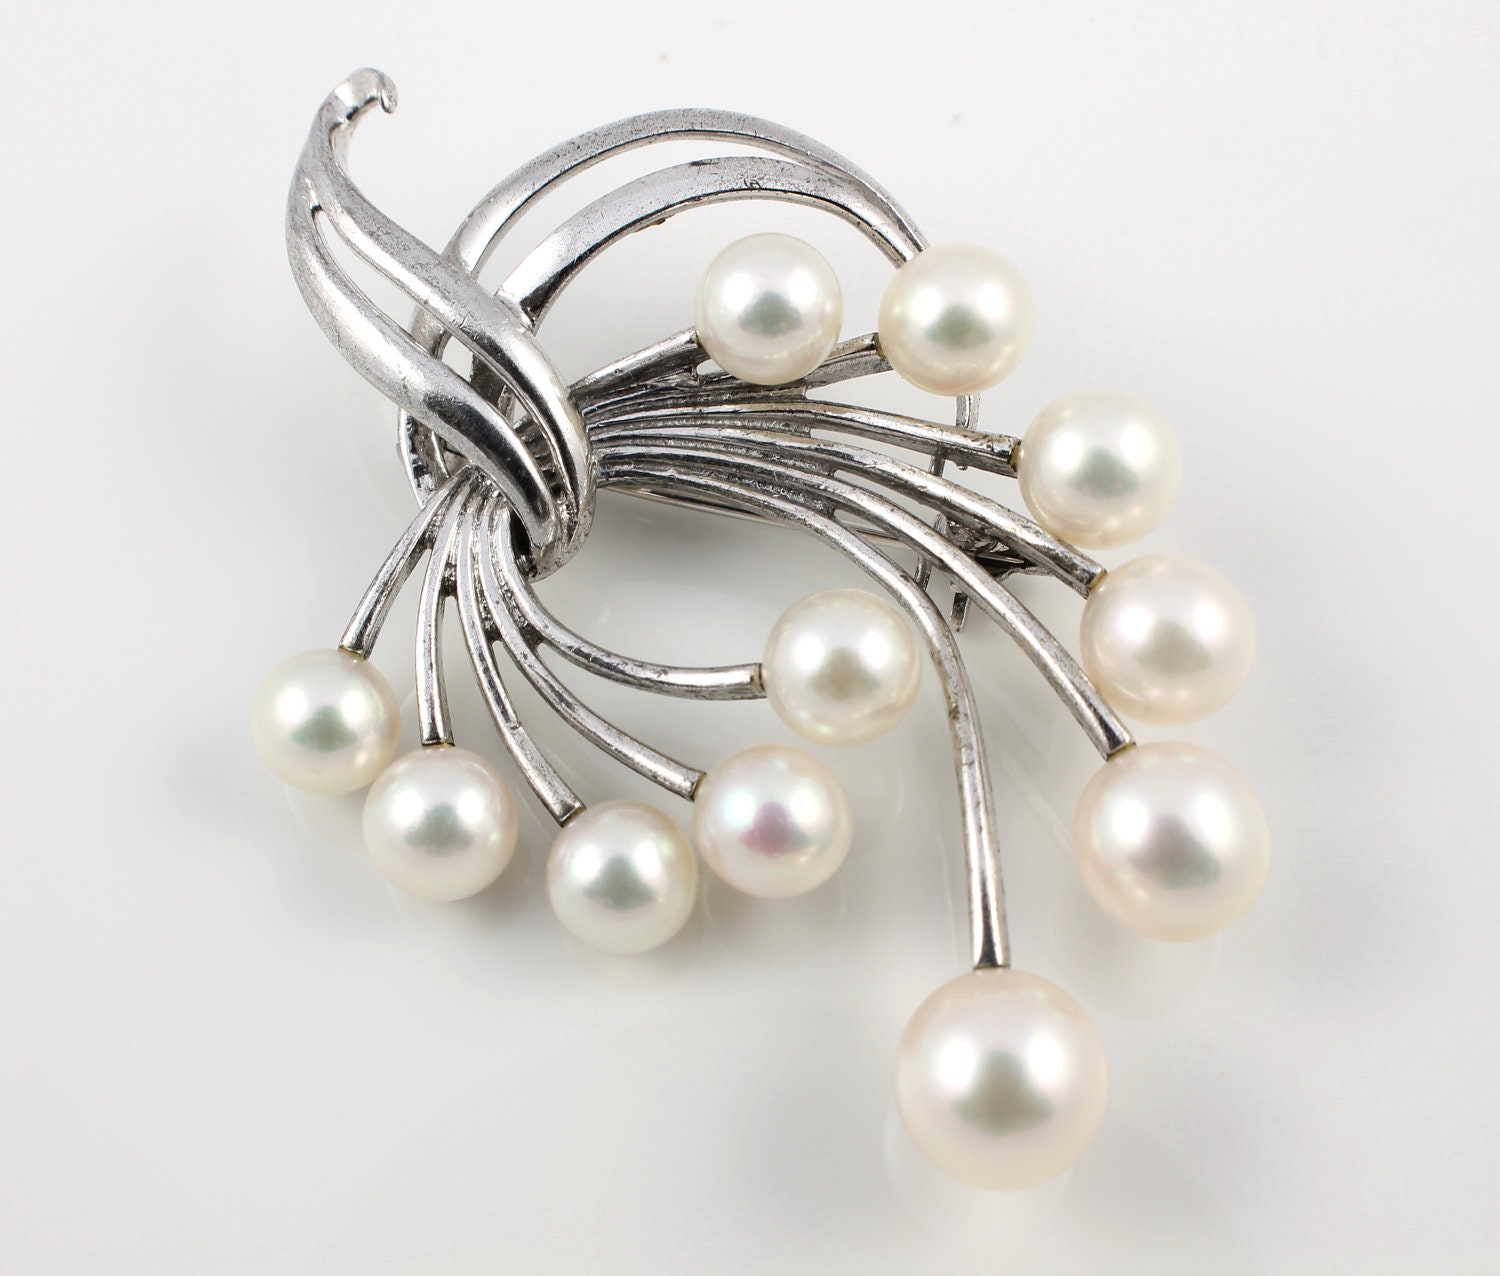 Authentic Mikimoto Pearl brooch Sterling silver